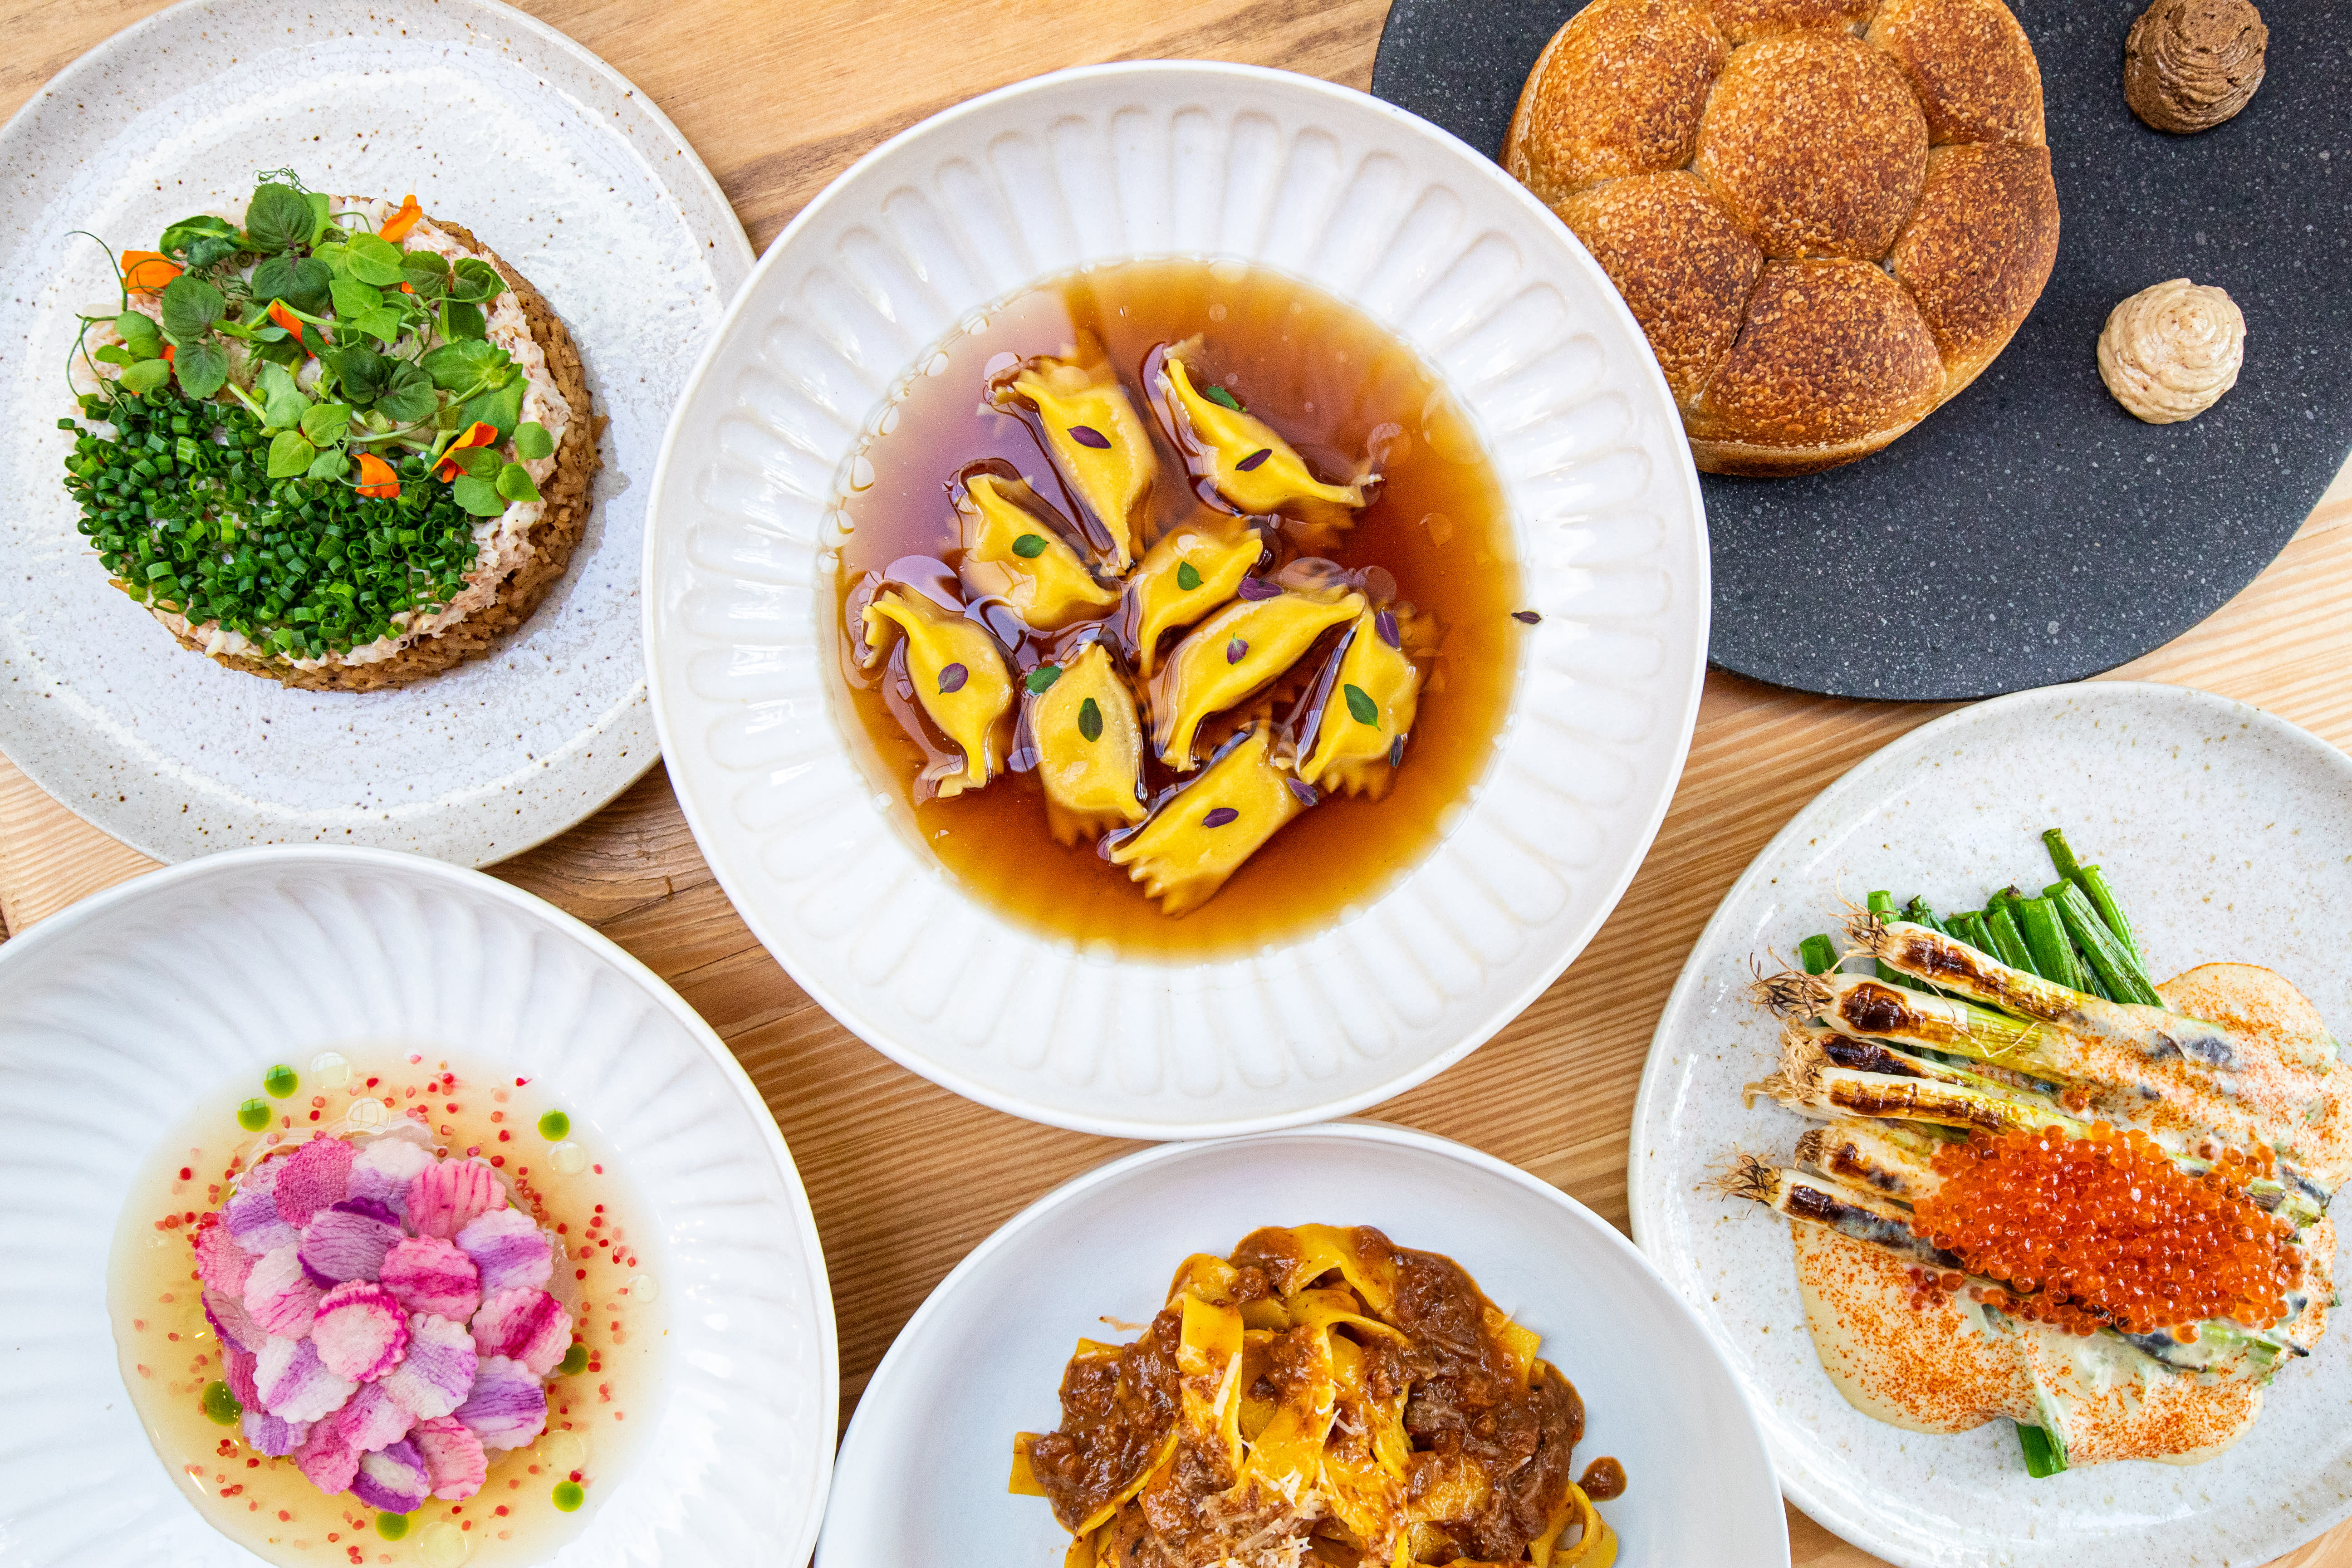 The 12 Best Restaurants In The Design District - Miami - The Infatuation